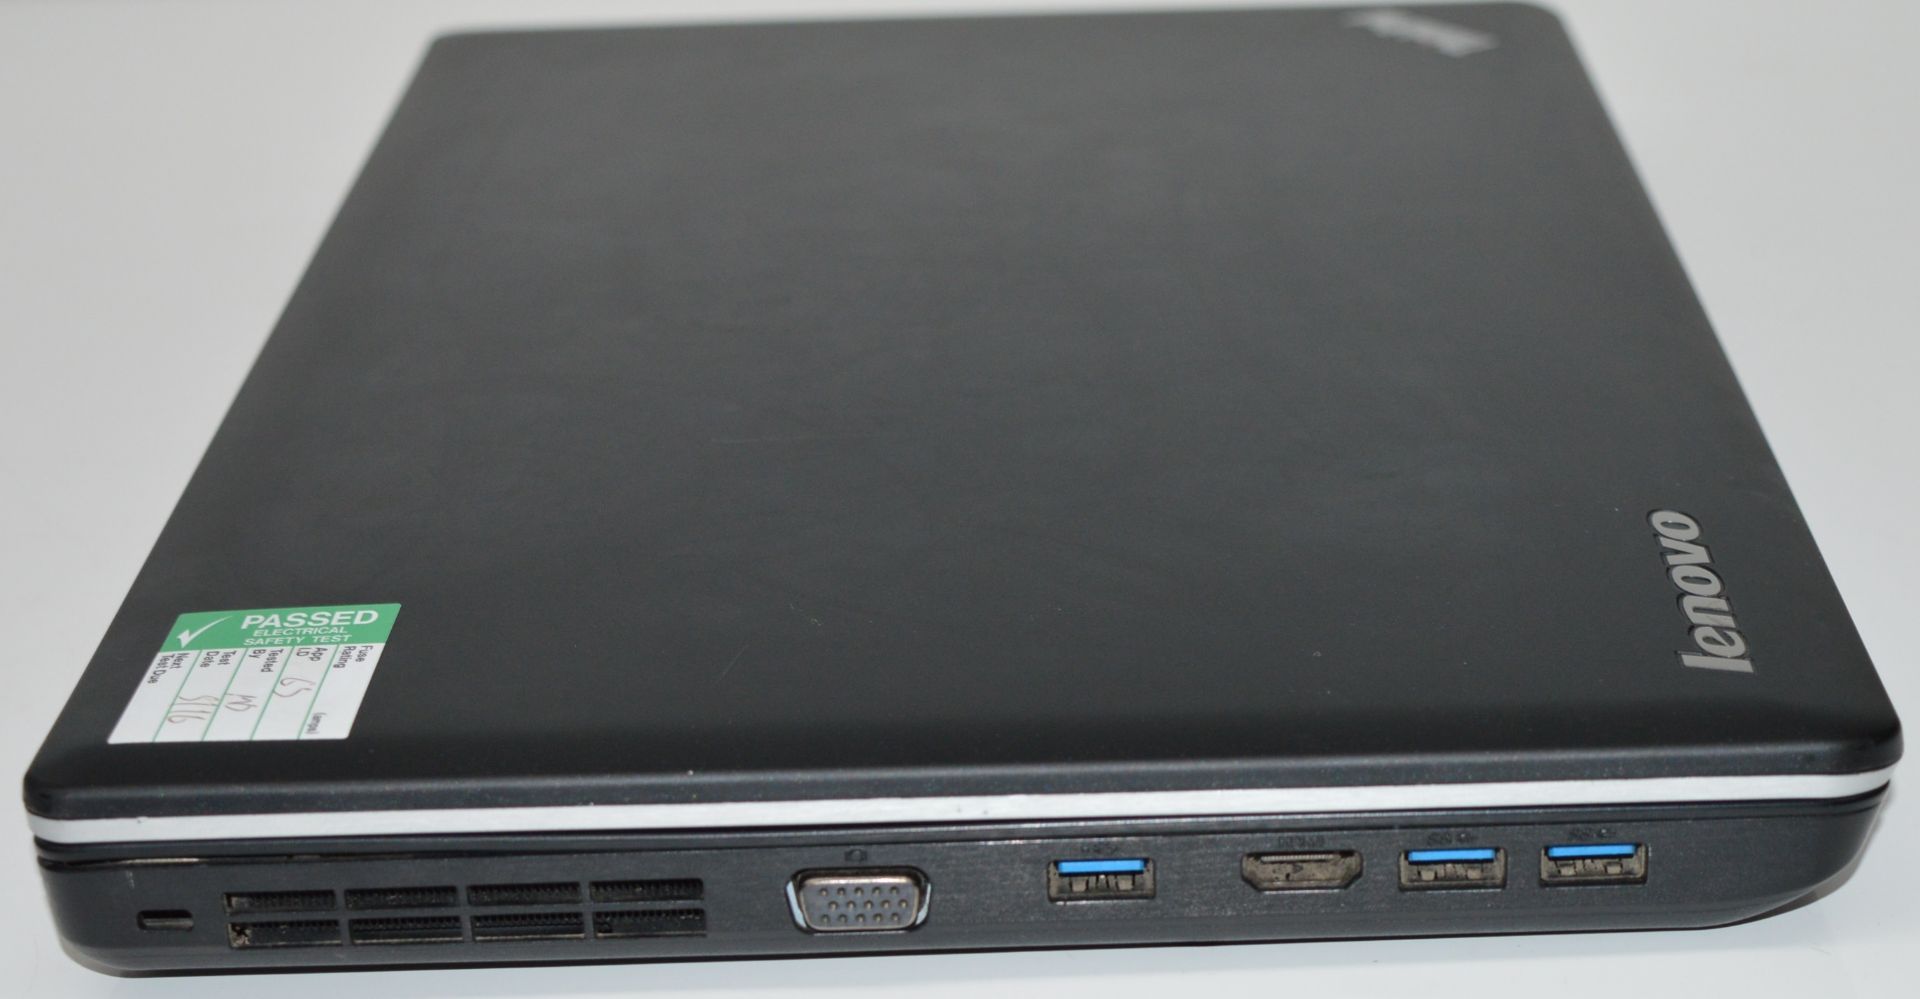 1 x Lenovo Thinkpad E530 Laptop Computer - Features 15.6 Inch Screen, Intel Core i3-2370M 2.4ghz - Image 2 of 3